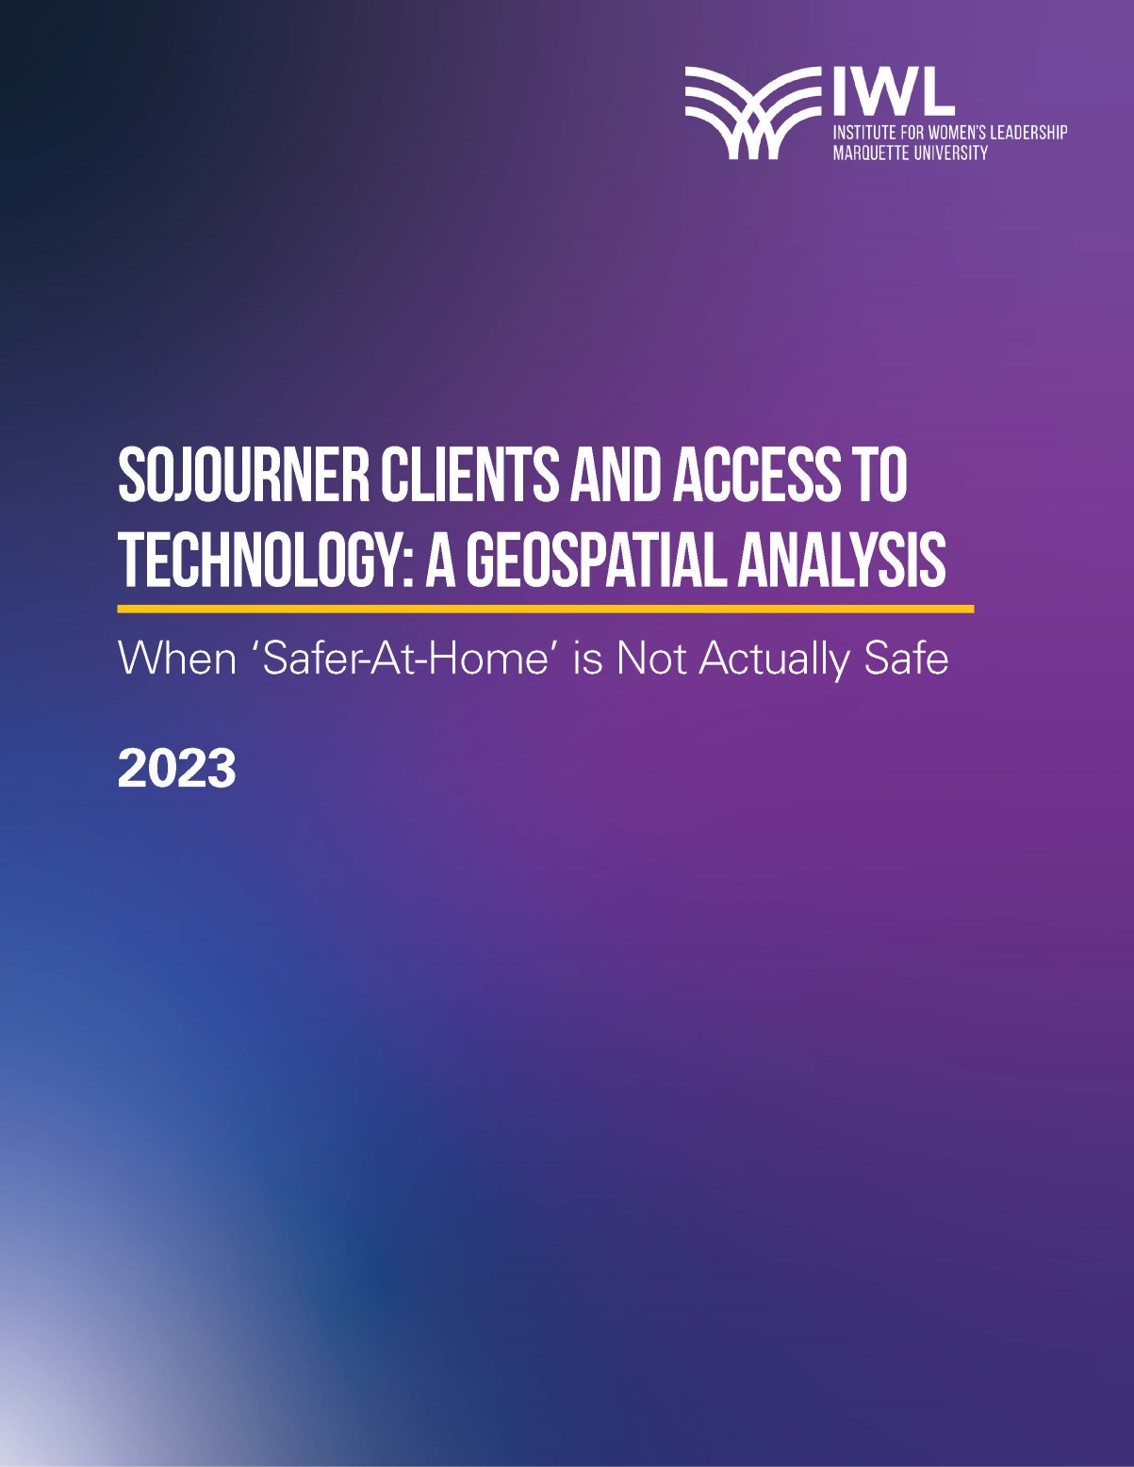 Front Cover of "Sojourner Clients and Access to Technology: A Geospatial Analysis" | A "When 'Safer-at-Home' is Not Actually Safe" paper